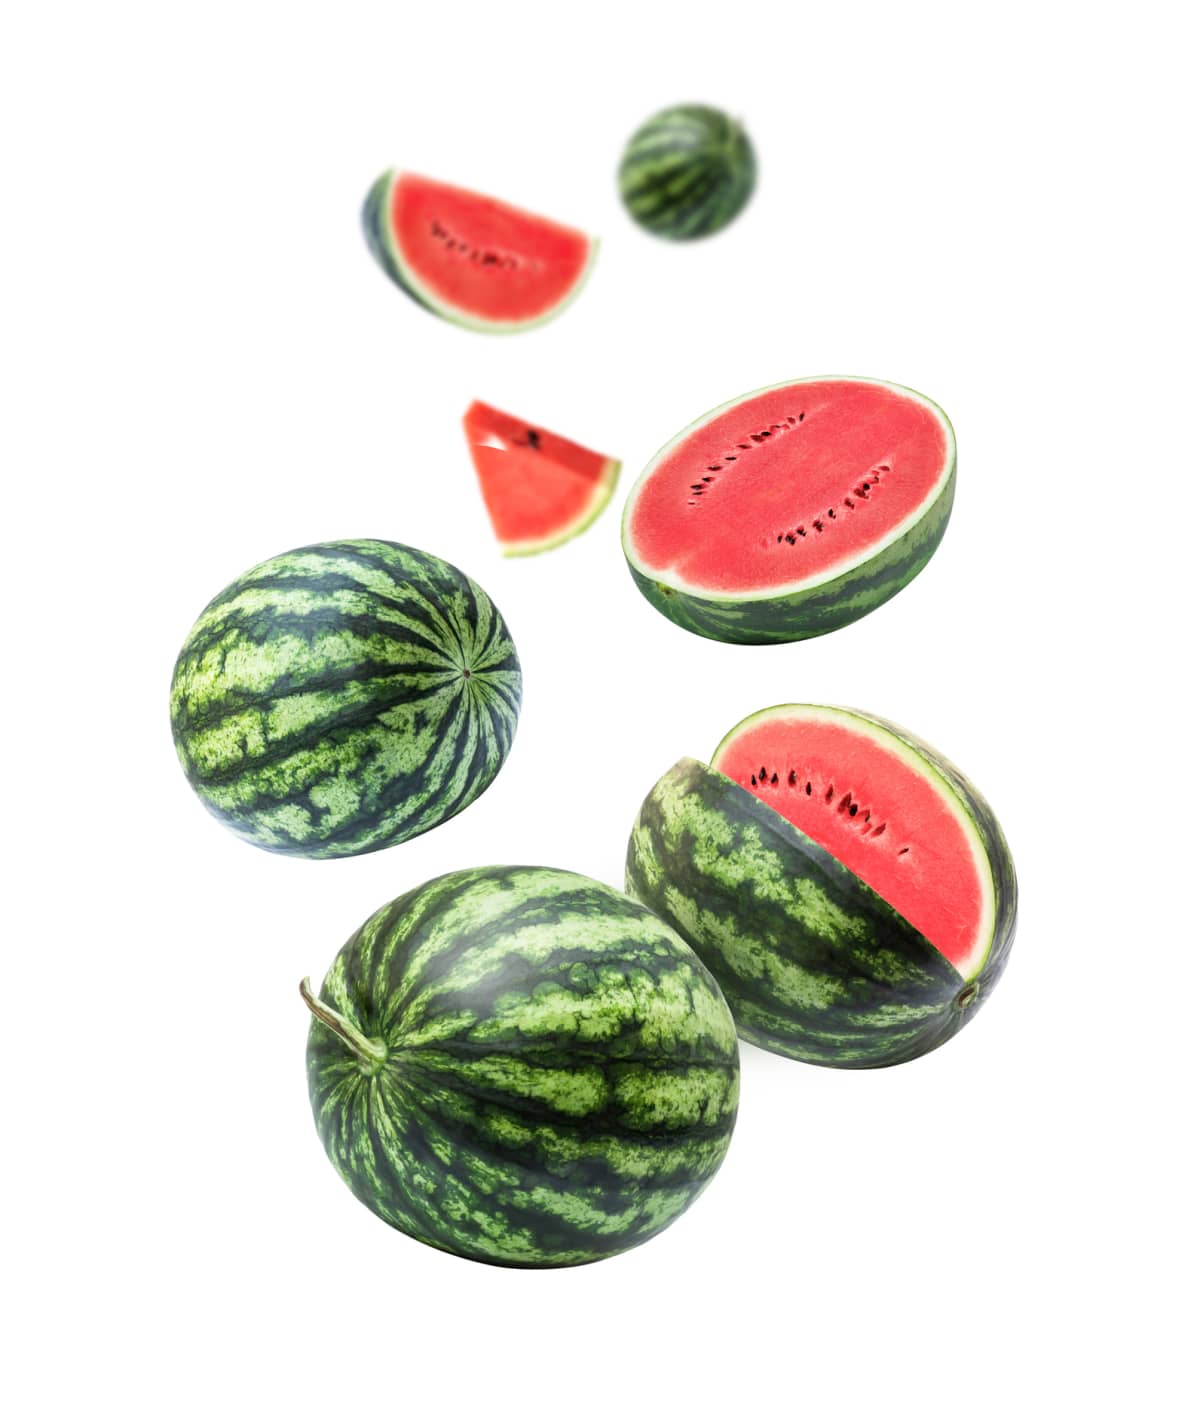 Watermelons falling in the mid air on a white background